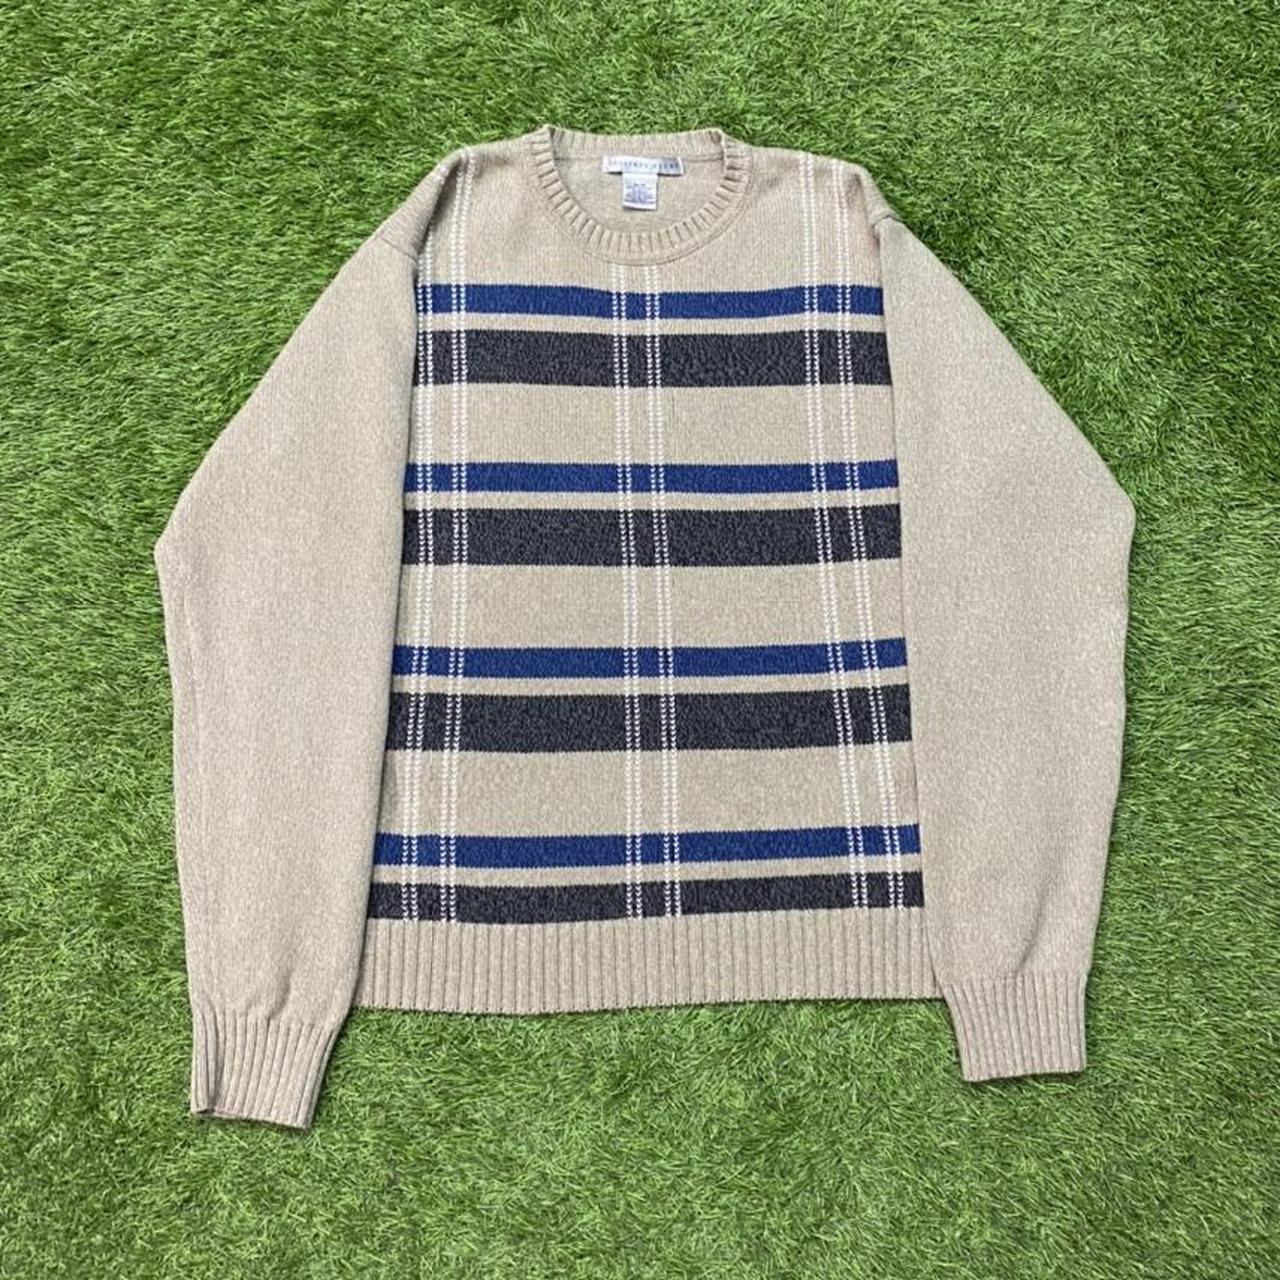 Product Image 1 - Vintage Striped Patterned Sweater!!
Condition: Refer